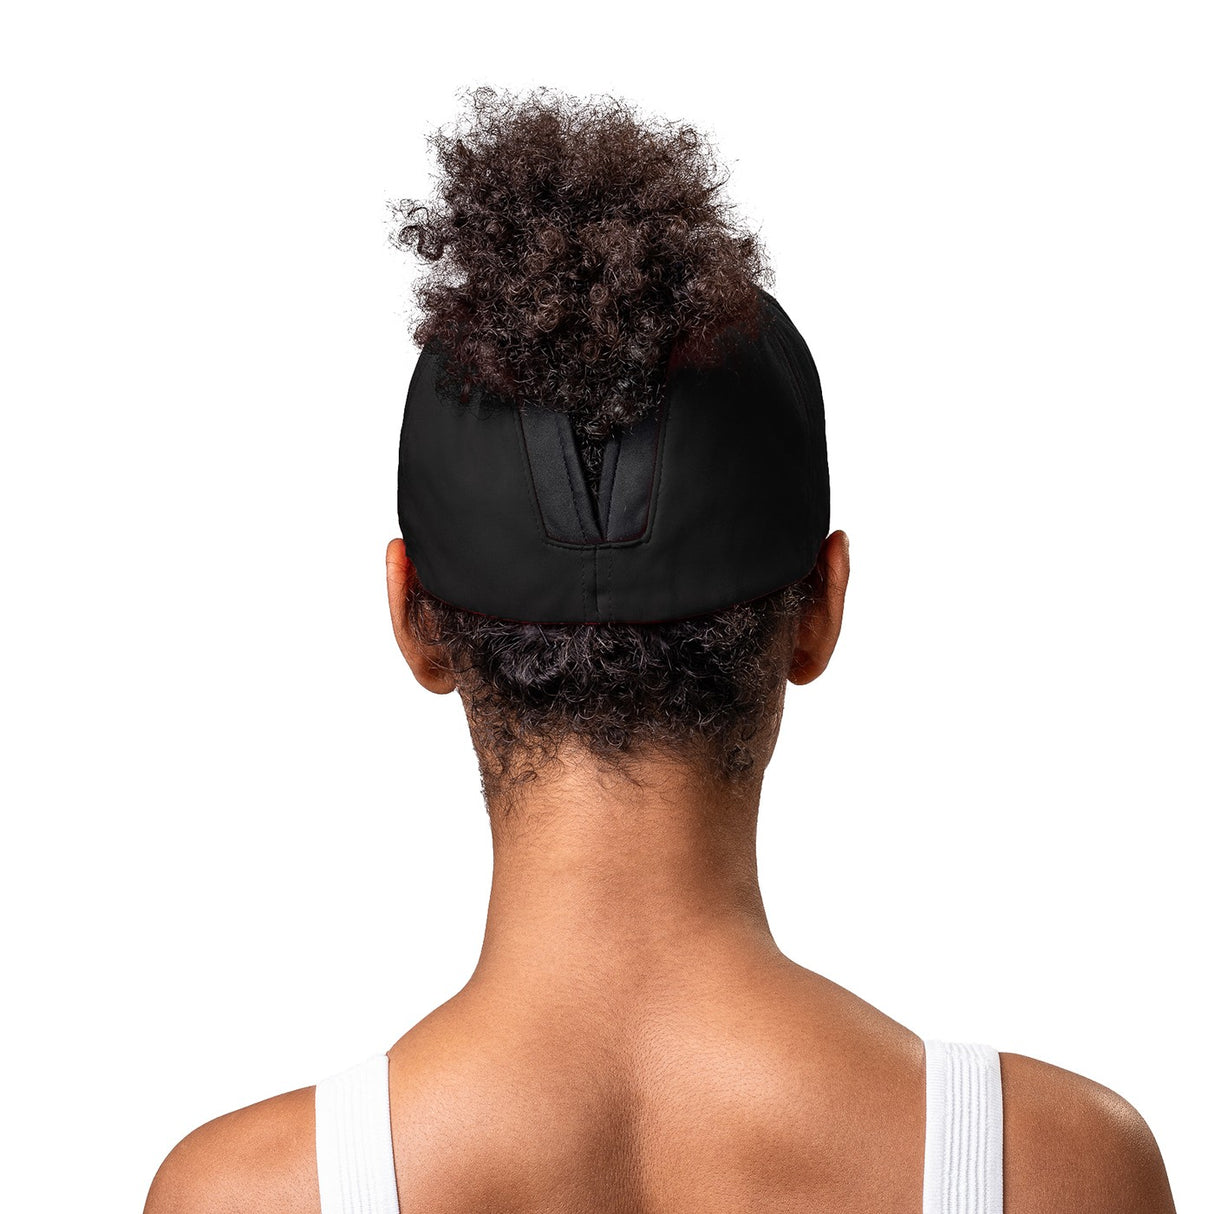 Top Knot Women's High Ponytail Casual Cap